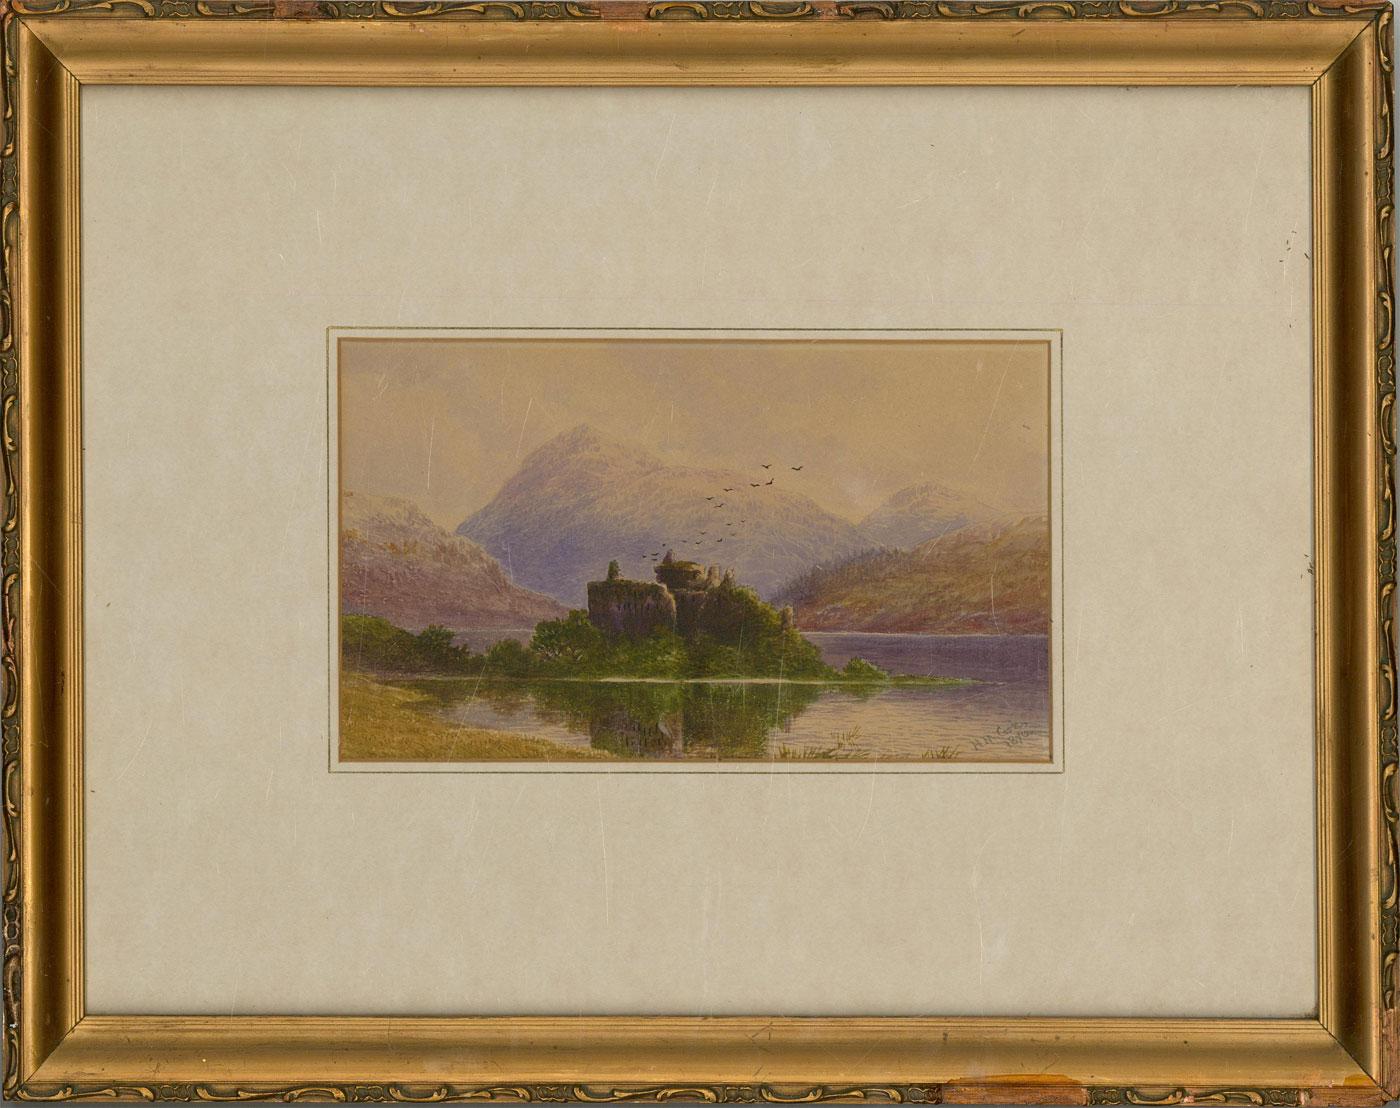 A delicate watercolour painting by the artist Herbert Moxon Cook. The scene depicts ;Kilchurn Castle, a ruined structure on a rocky peninsula at the northeastern end of Loch Awe, in Argyll and Bute, Scotland. Signed and dated to the lower right-hand